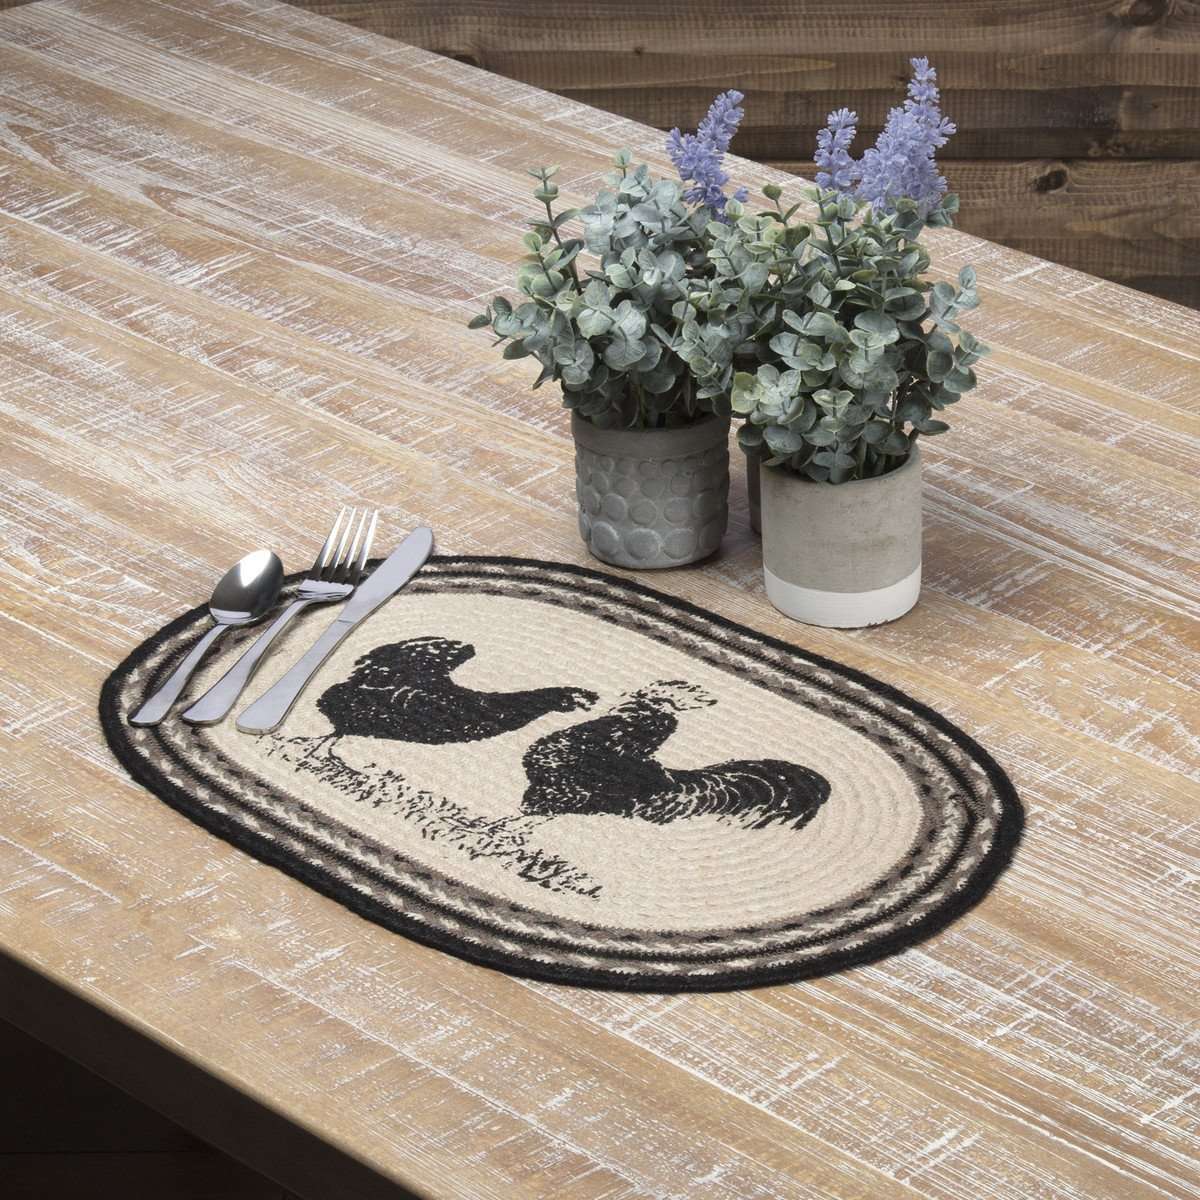 Sawyer Mill Charcoal Poultry Jute Braided Placemat Set of 6 - The Fox Decor